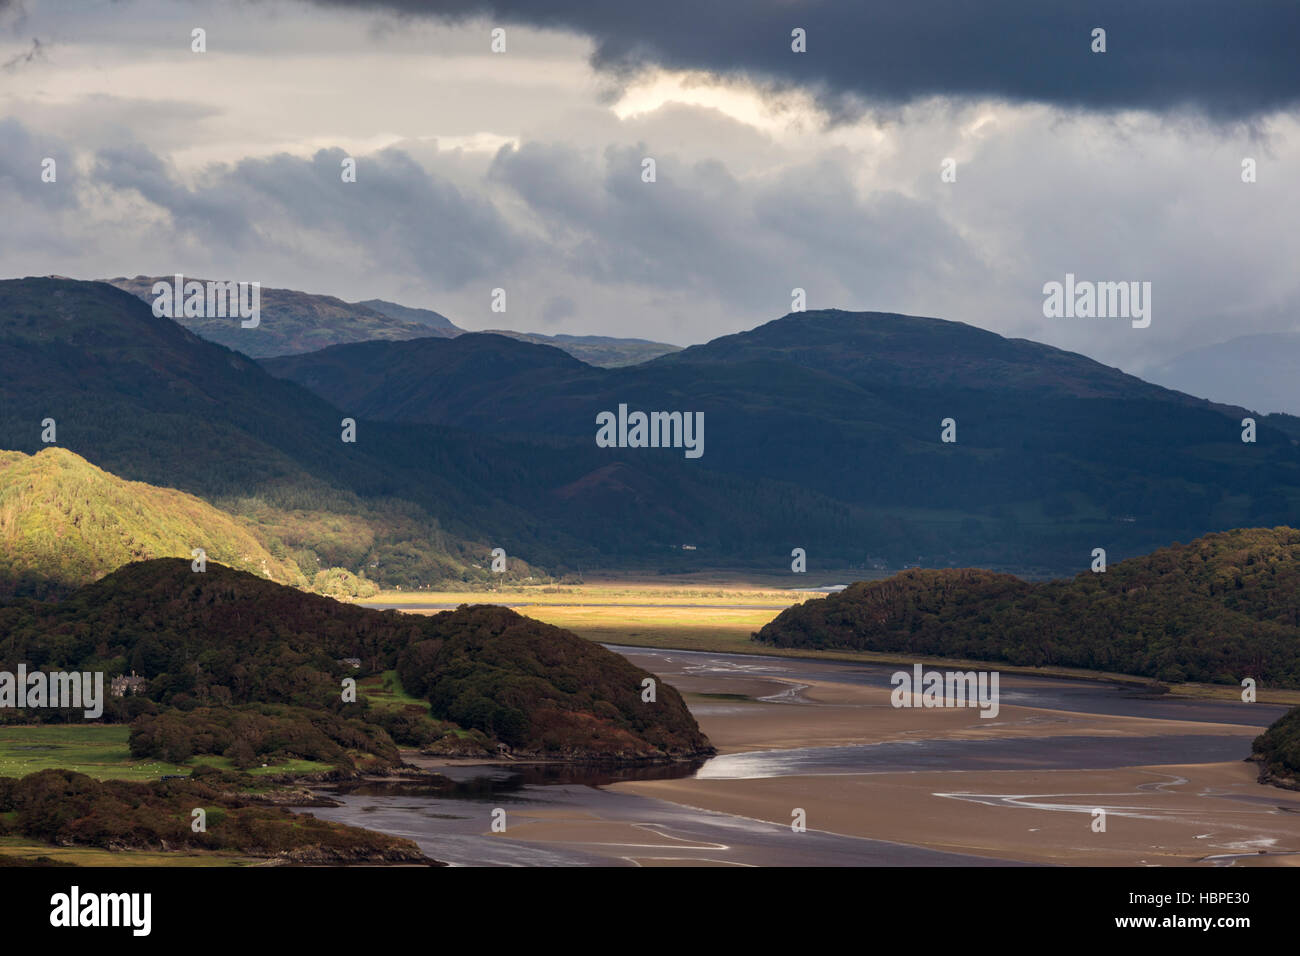 The Mawddach Estuary from the Panorama Walk, Snowdonia National Park, North Wales, UK Stock Photo